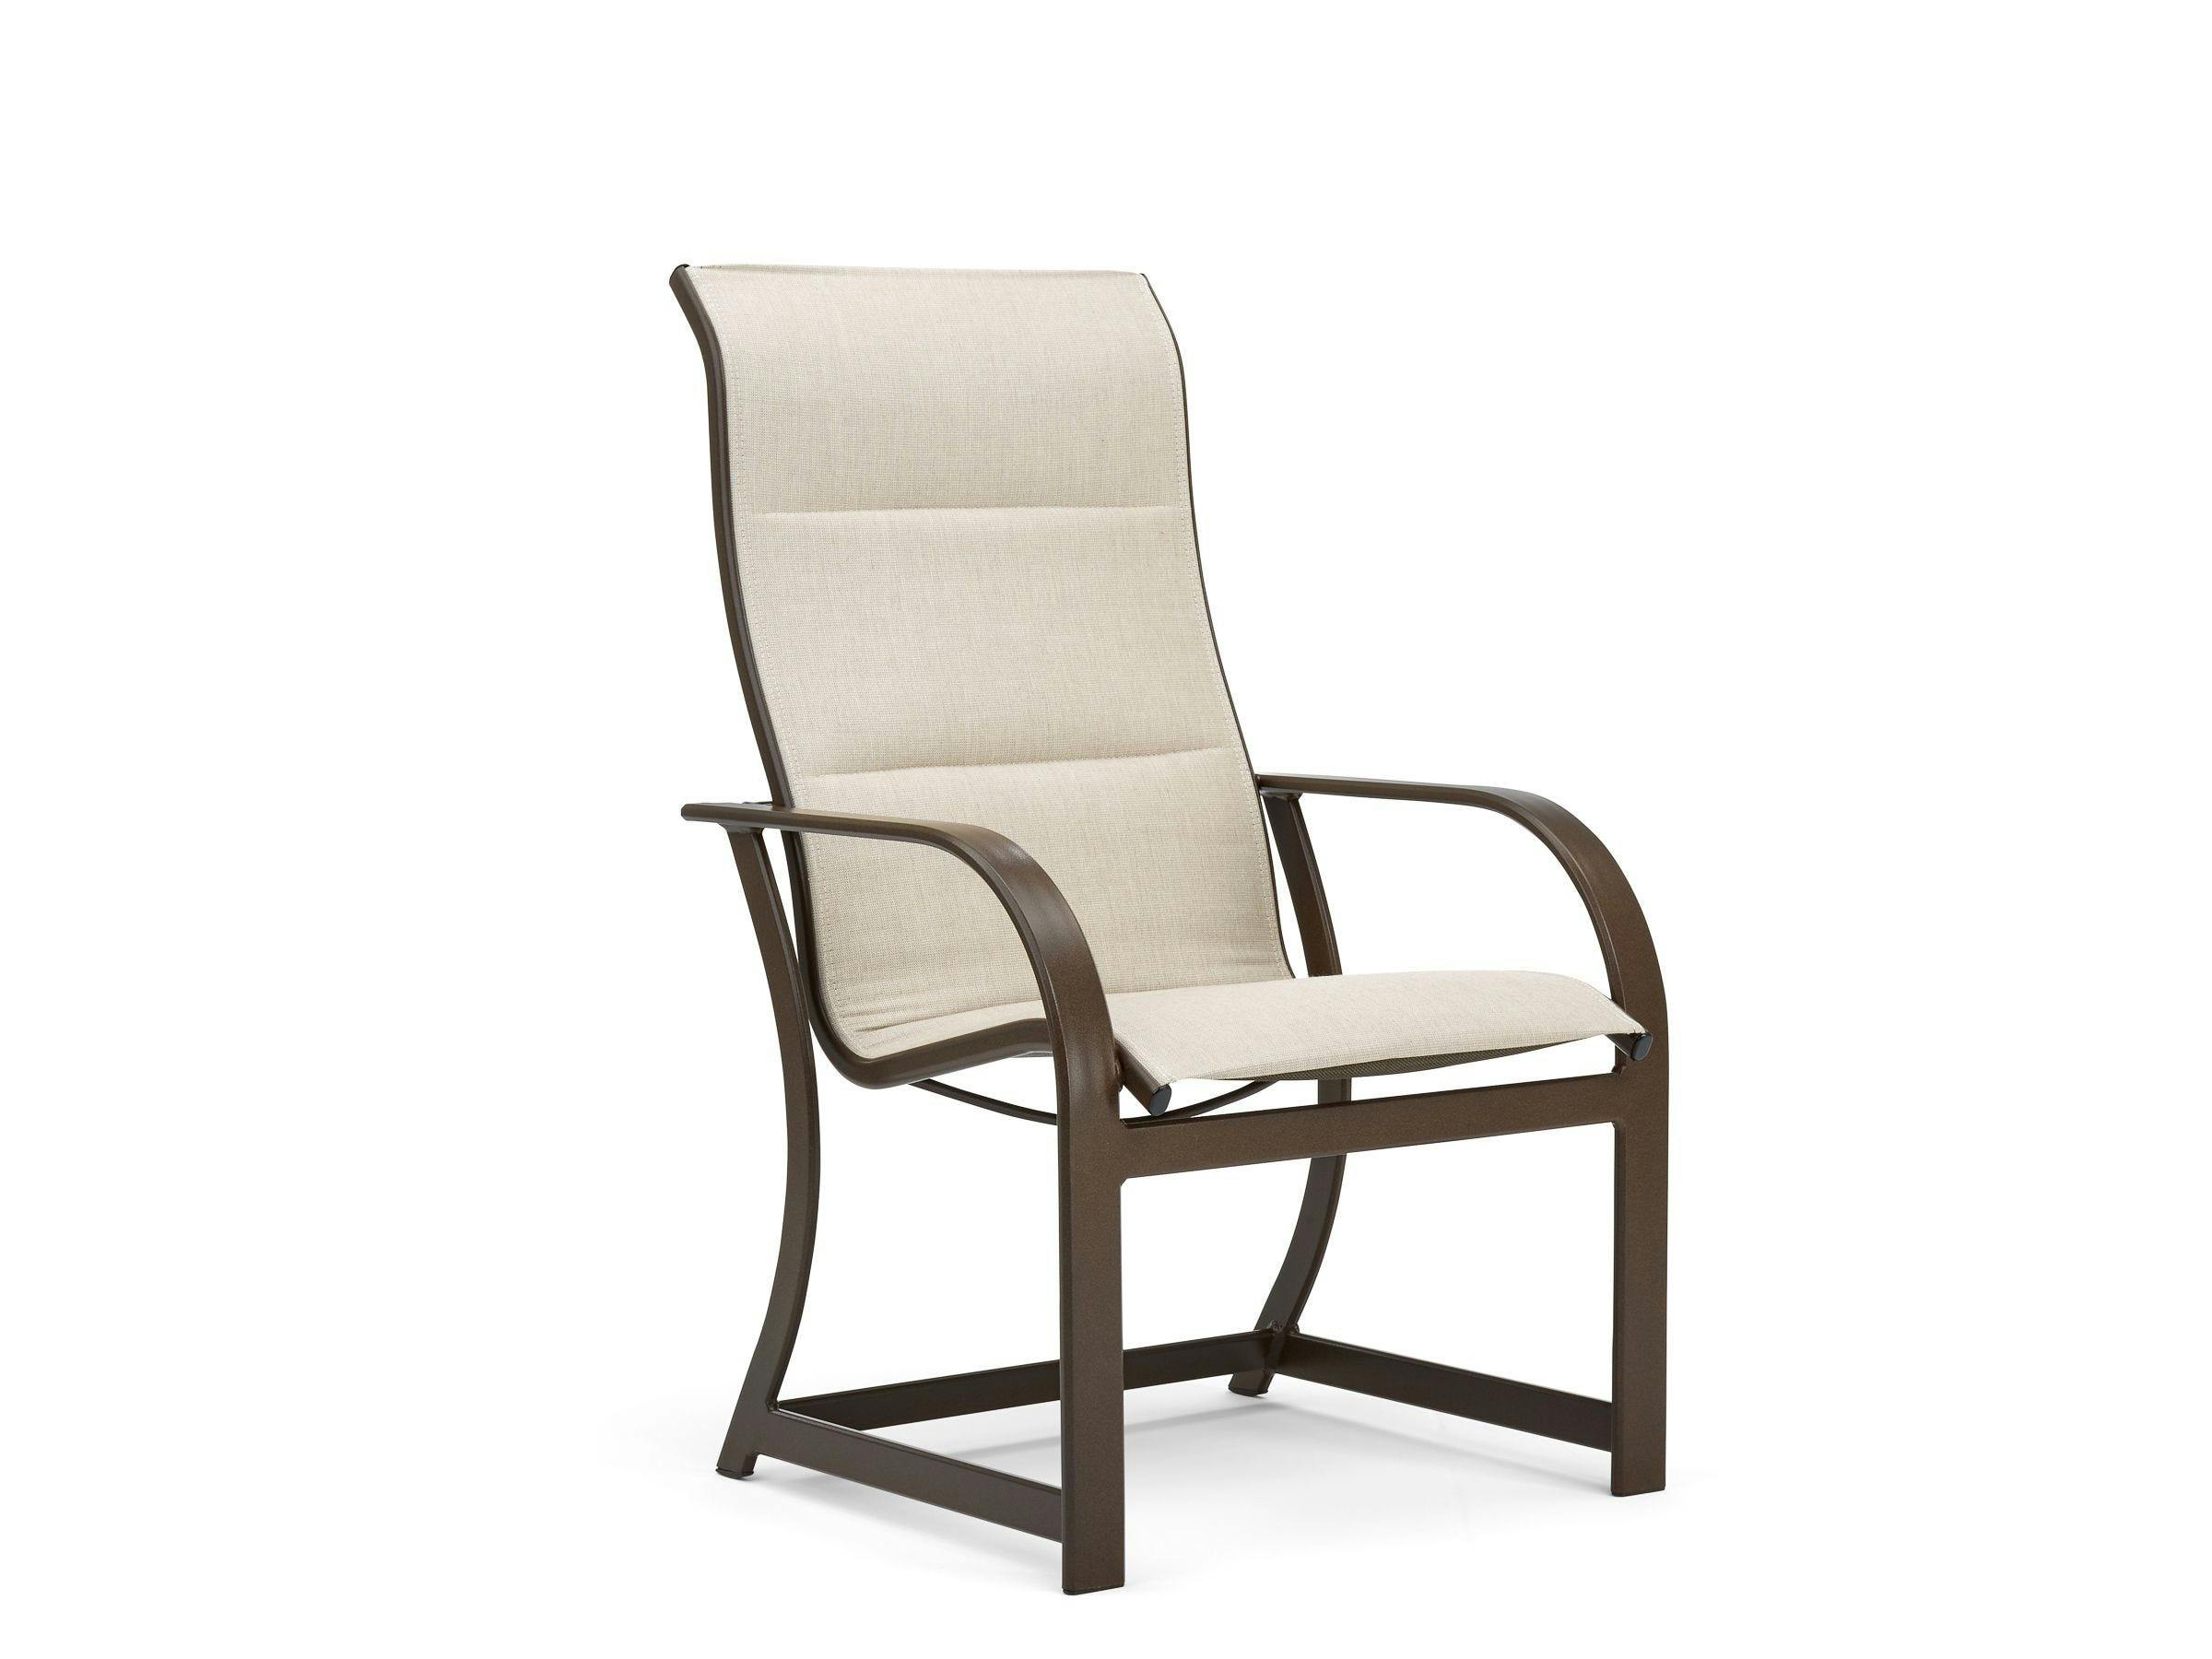 Key West Padded Sling Ultra High Back Dining Chair